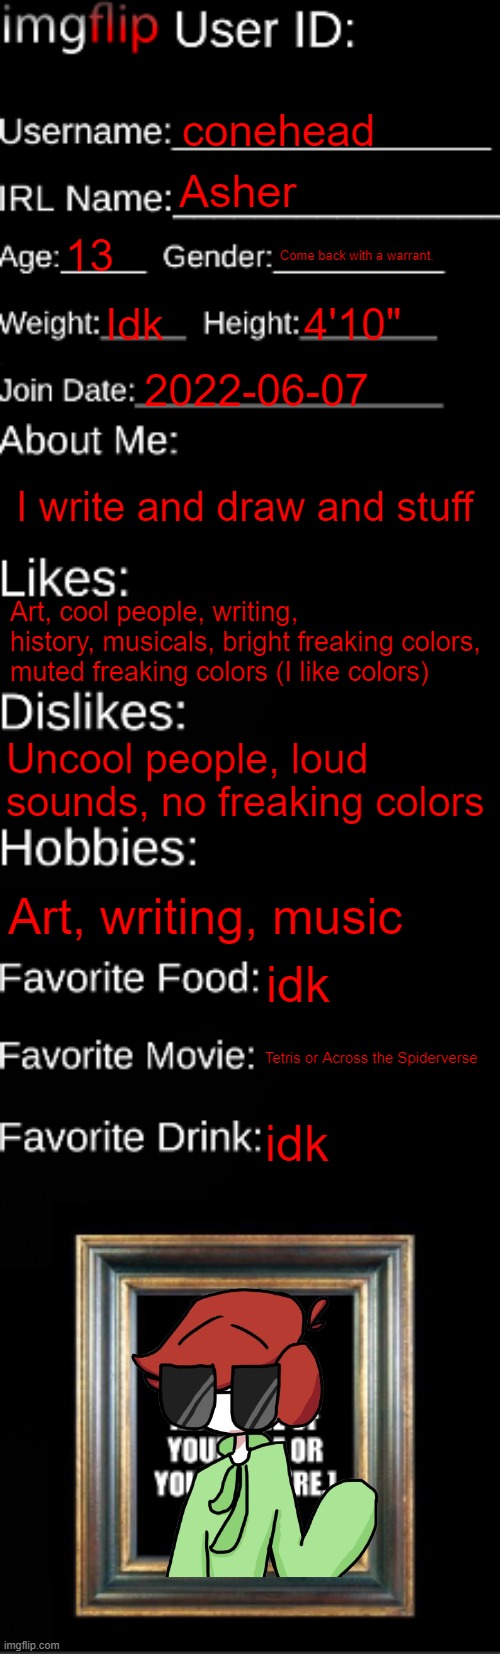 Colors are funky | conehead; Asher; 13; Come back with a warrant. Idk; 4'10"; 2022-06-07; I write and draw and stuff; Art, cool people, writing, history, musicals, bright freaking colors, muted freaking colors (I like colors); Uncool people, loud sounds, no freaking colors; Art, writing, music; idk; Tetris or Across the Spiderverse; idk | image tagged in imgflip id card | made w/ Imgflip meme maker